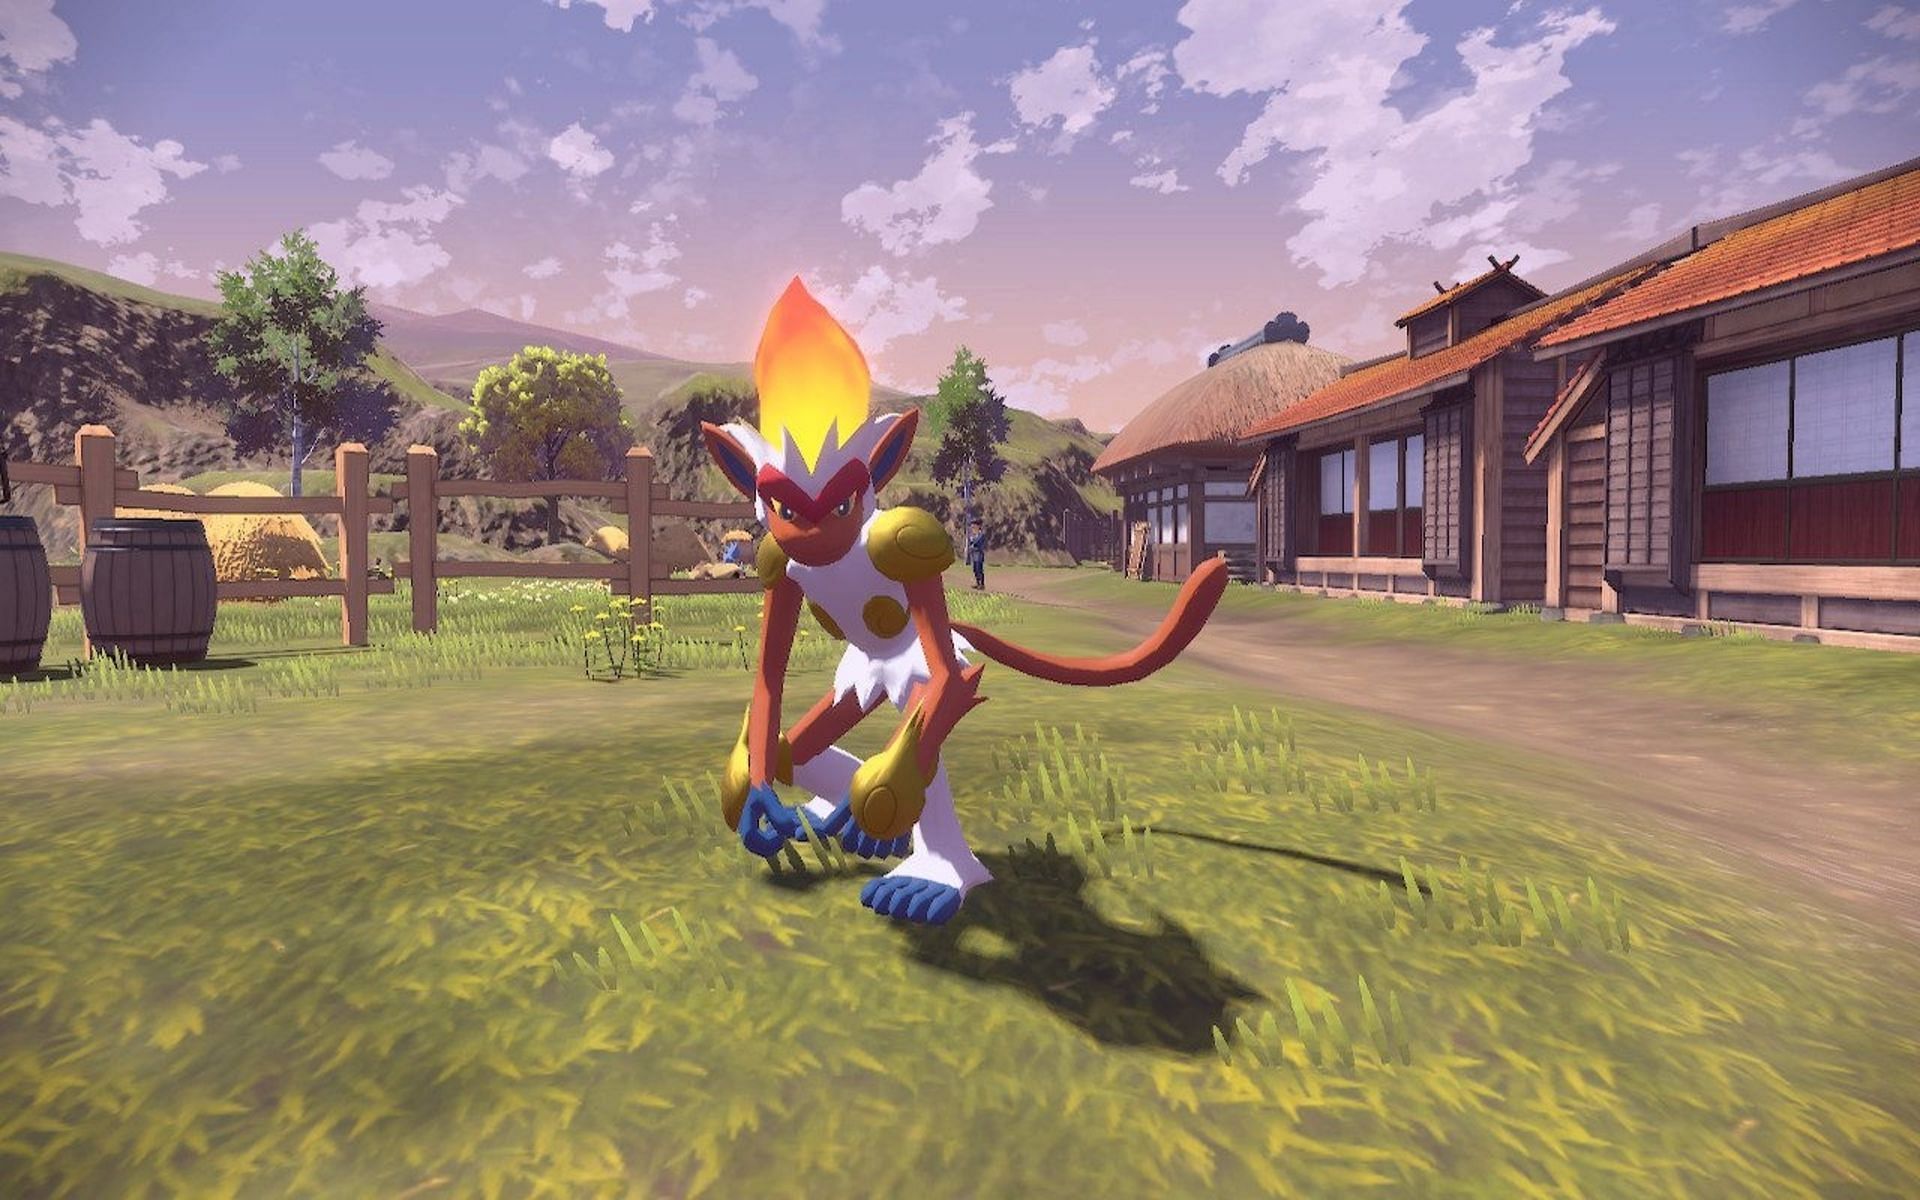 Infernape is one of the strongest Fire-types in the game (Image via Game Freak)